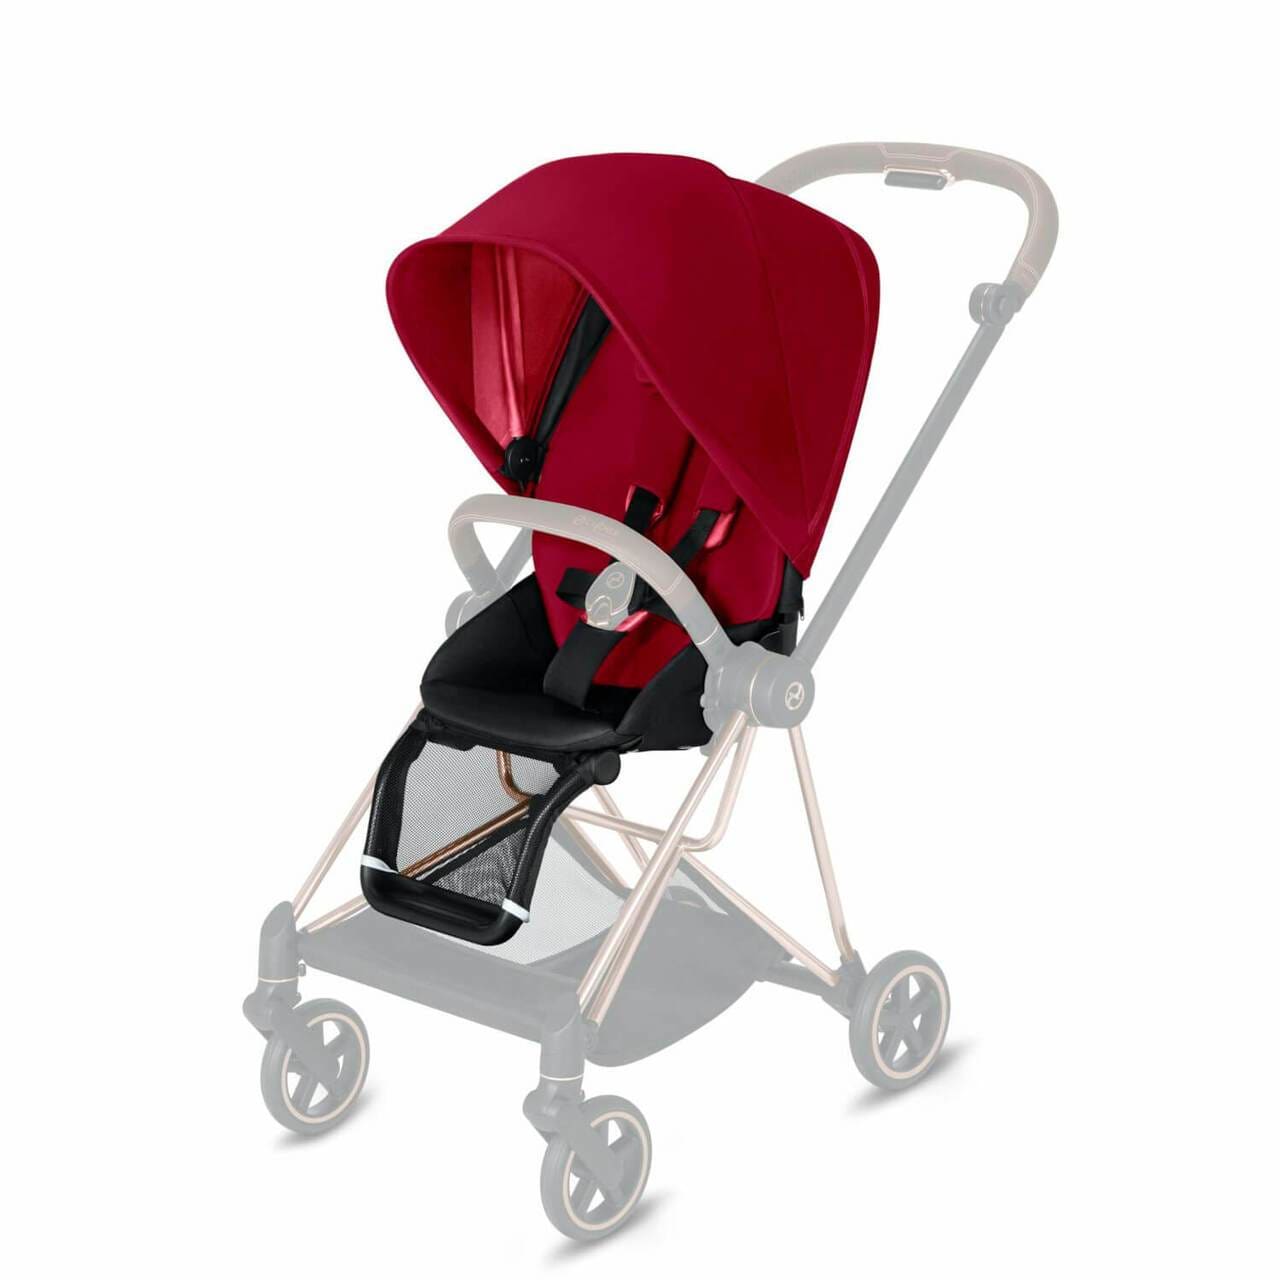 CYBEX Mios 3-in-1 Travel System Seat Pack – True Red 519003383 4058511701745